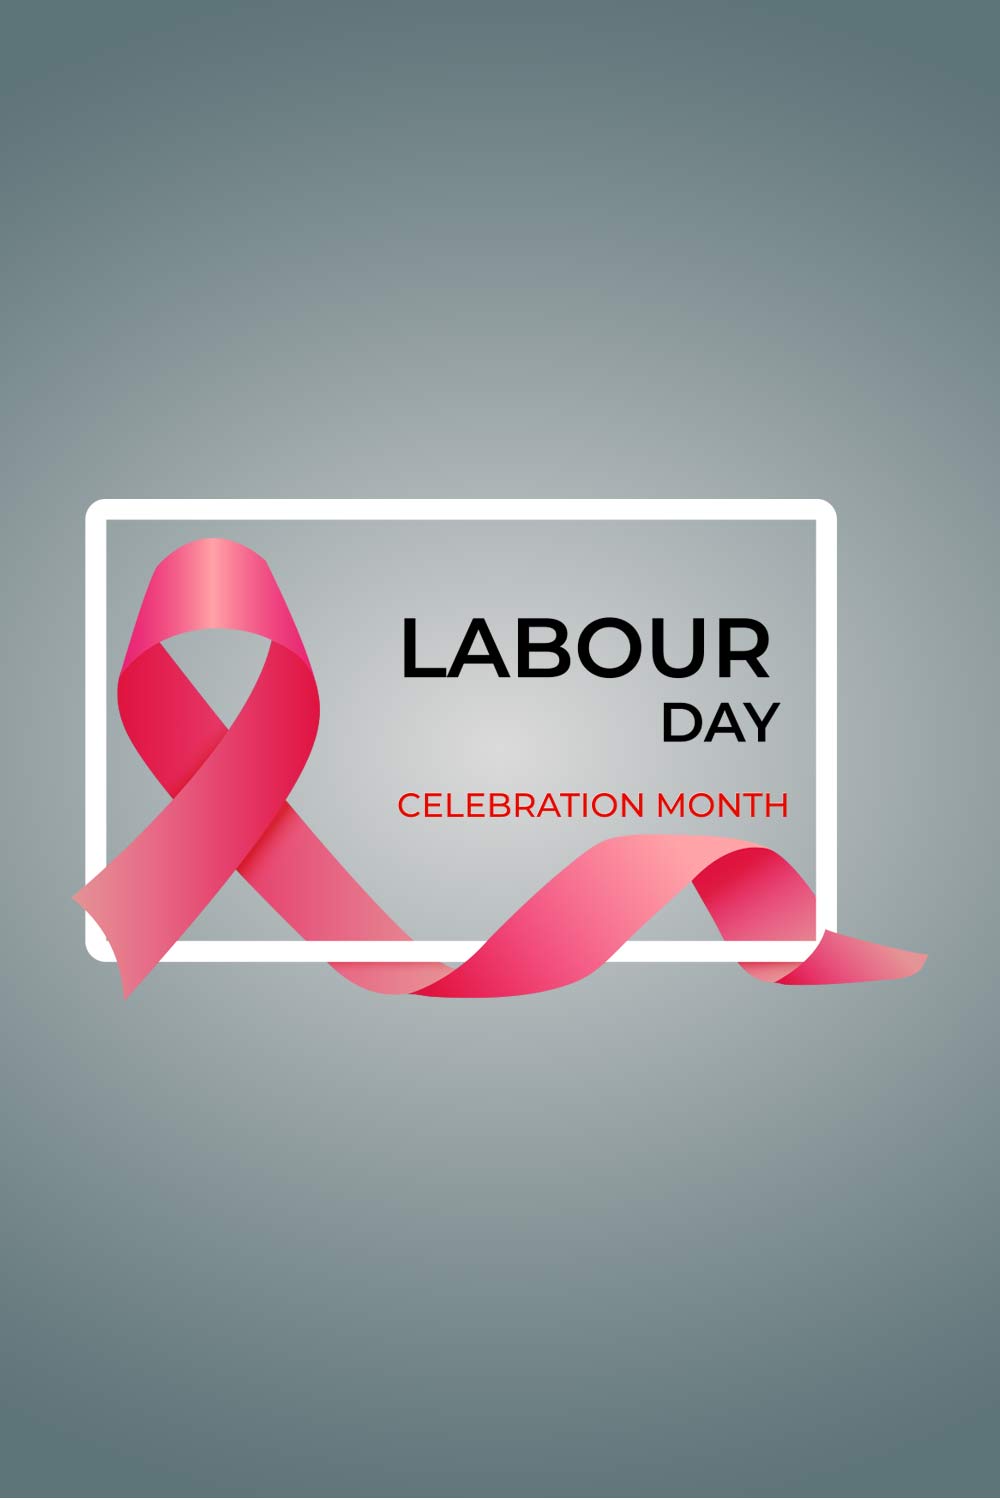 Care vector international workers beautiful labor day template design poster background pinterest preview image.